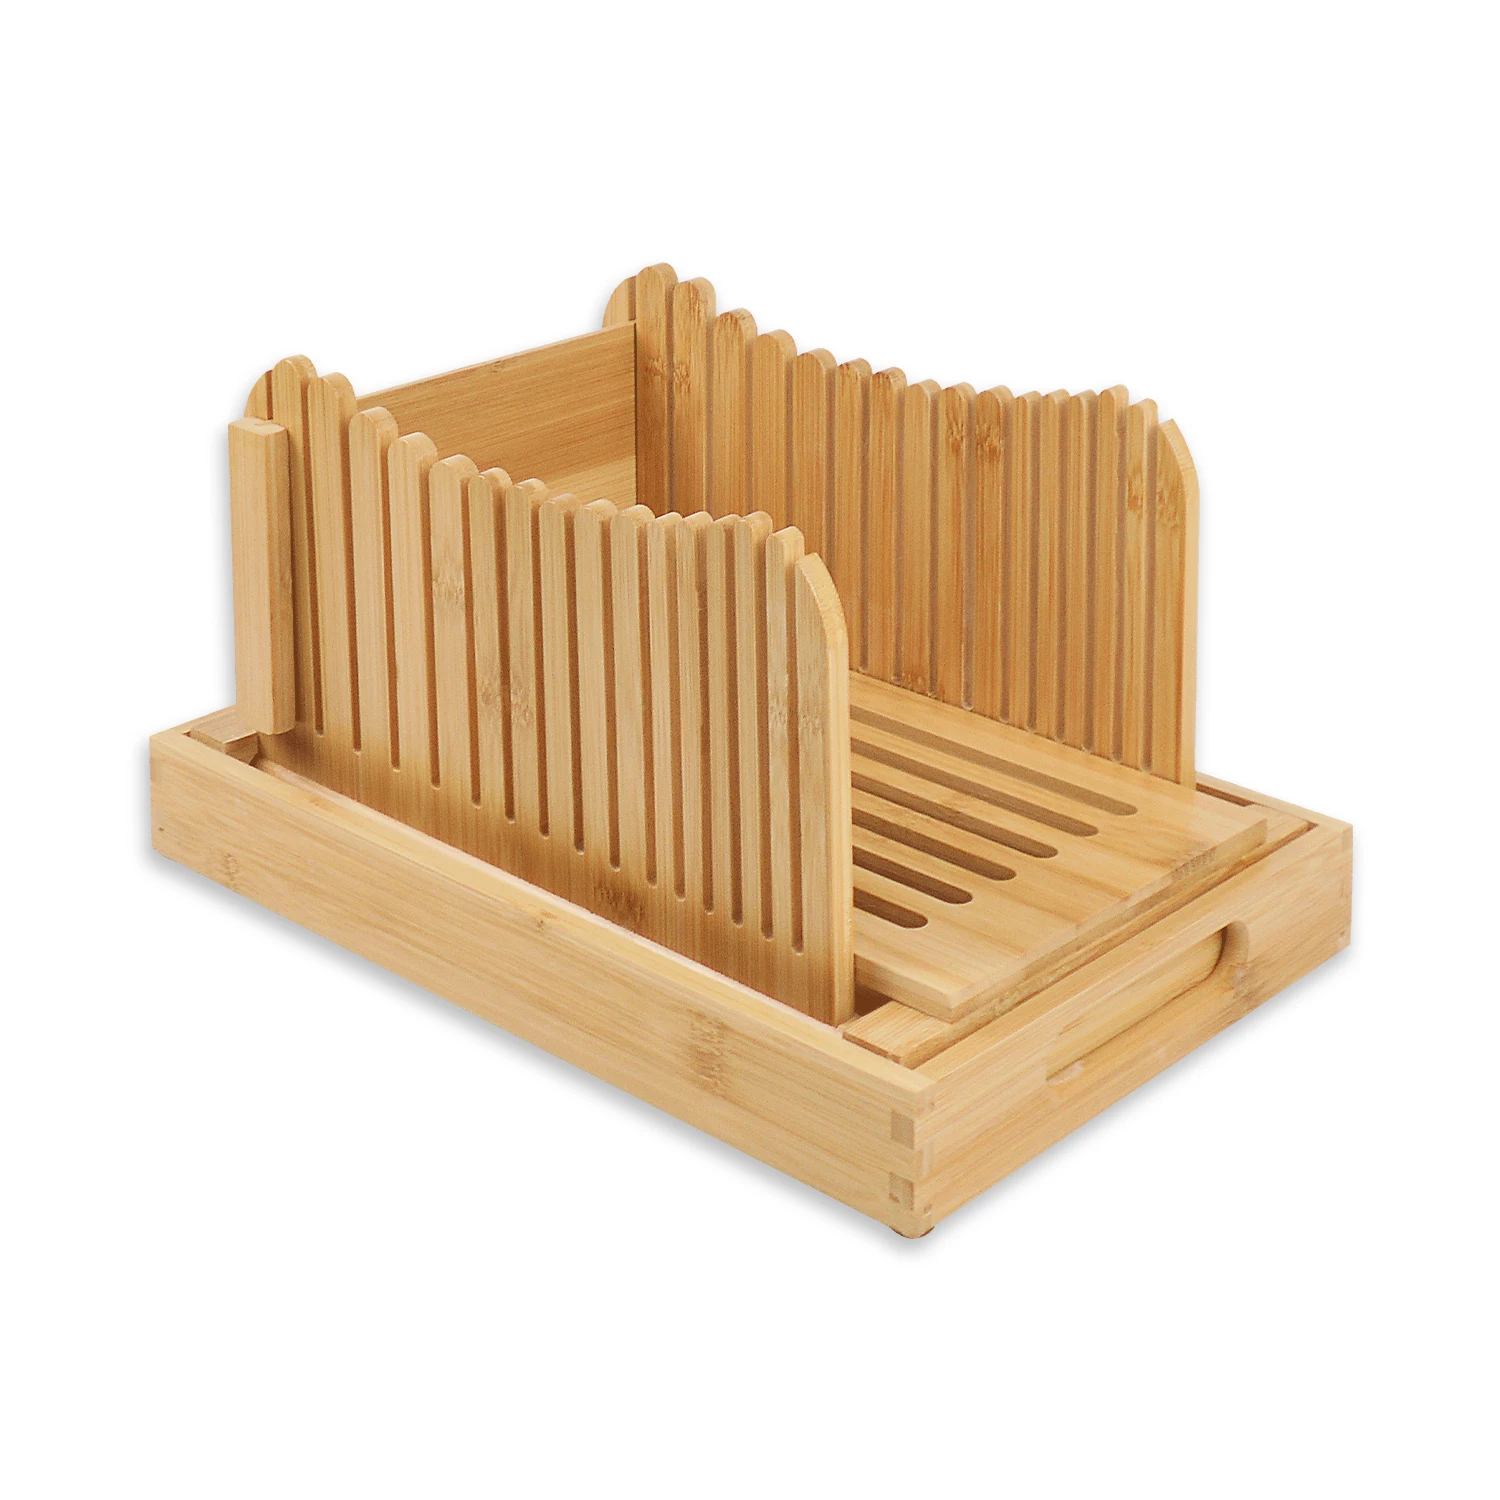 

3 Thickness Adjustable Bamboo Bread Slicer Compact Foldable Bread Slicing Guide With Crumb Catcher Tray, Natural bamboo color